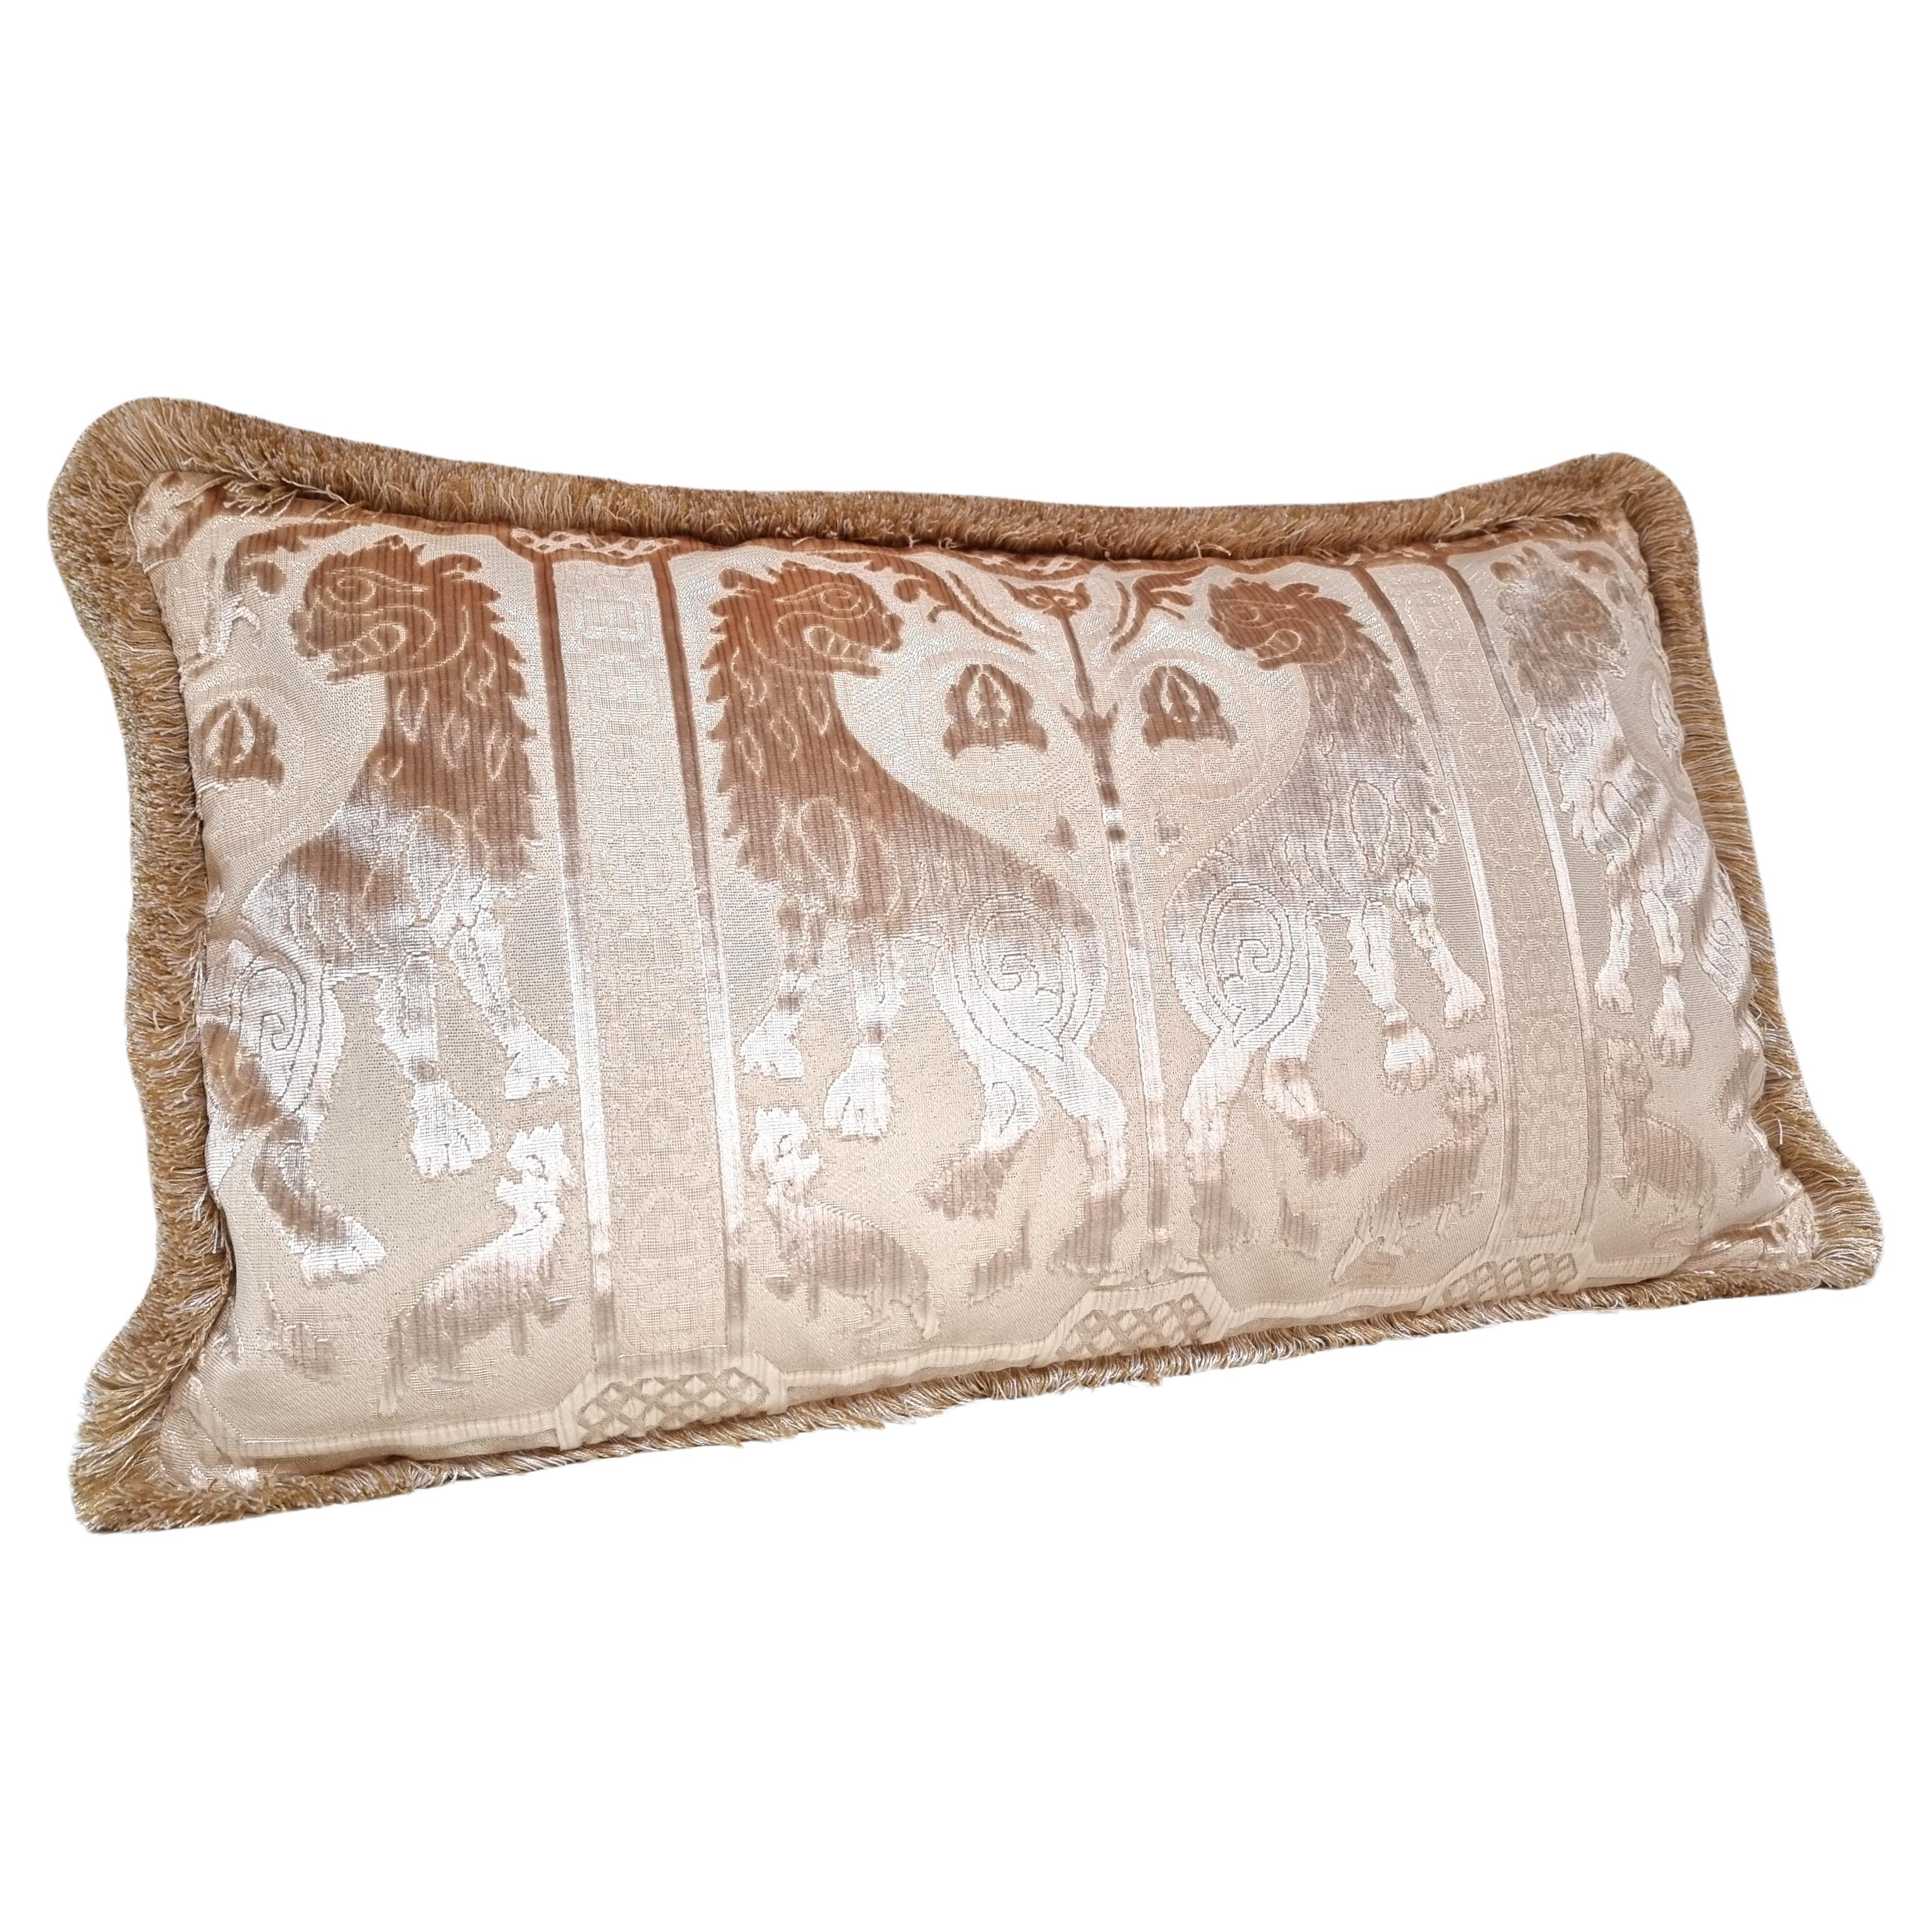 This amazing lumbar pillow is handmade using the iconic Leoni Bizantini - XII-XIV century design - silk heddle velvet in ivory color from 